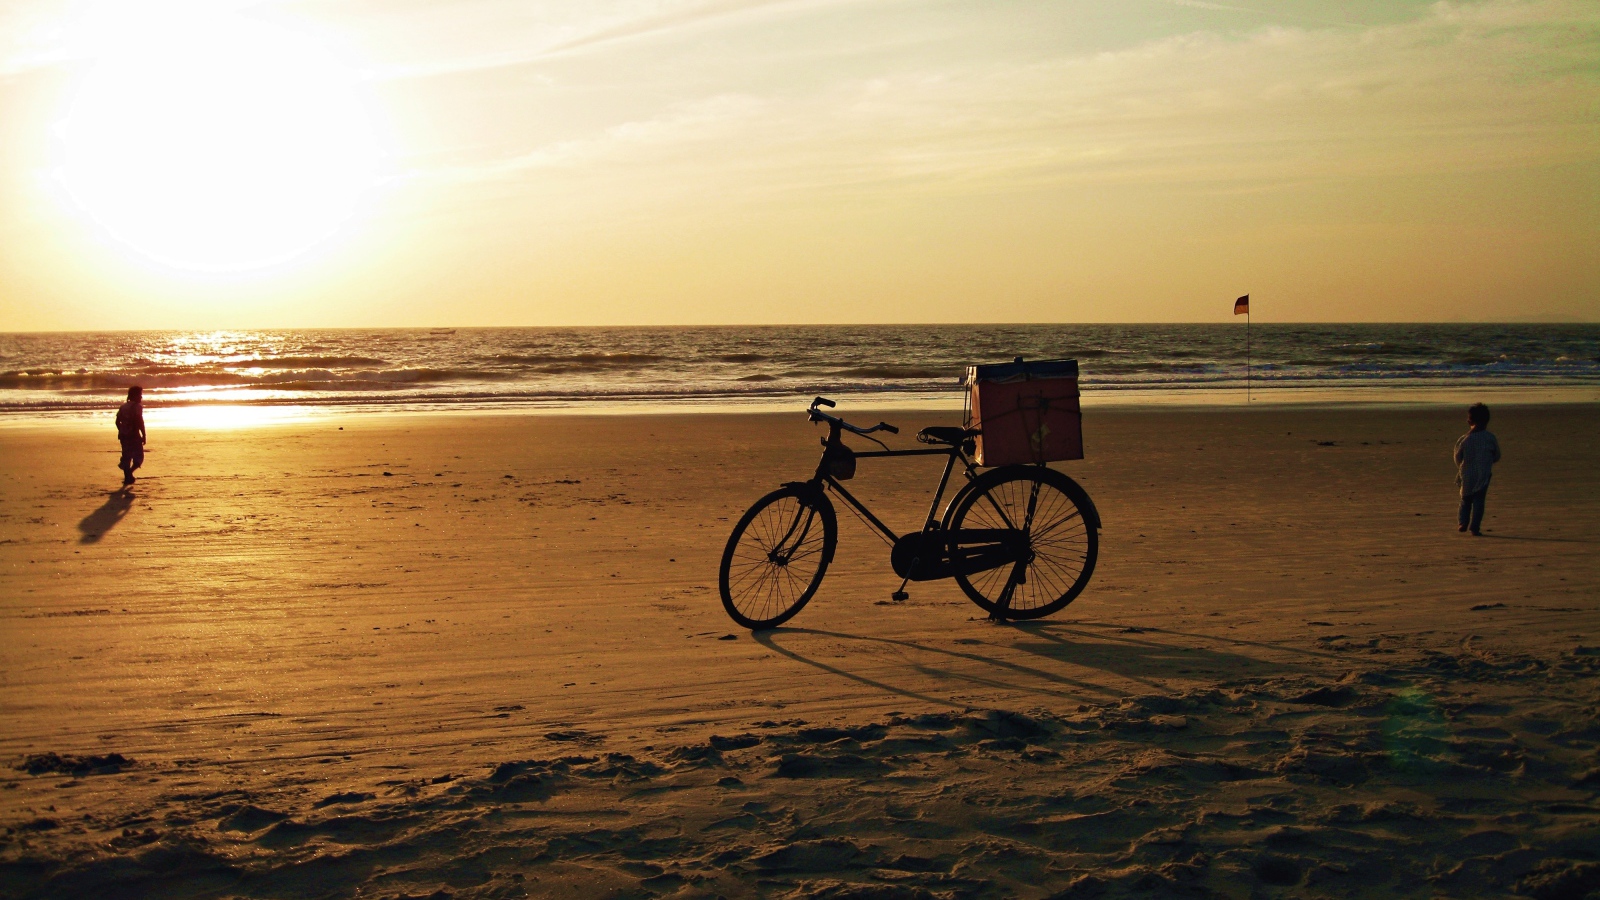 Bicycle on the beach in Goa